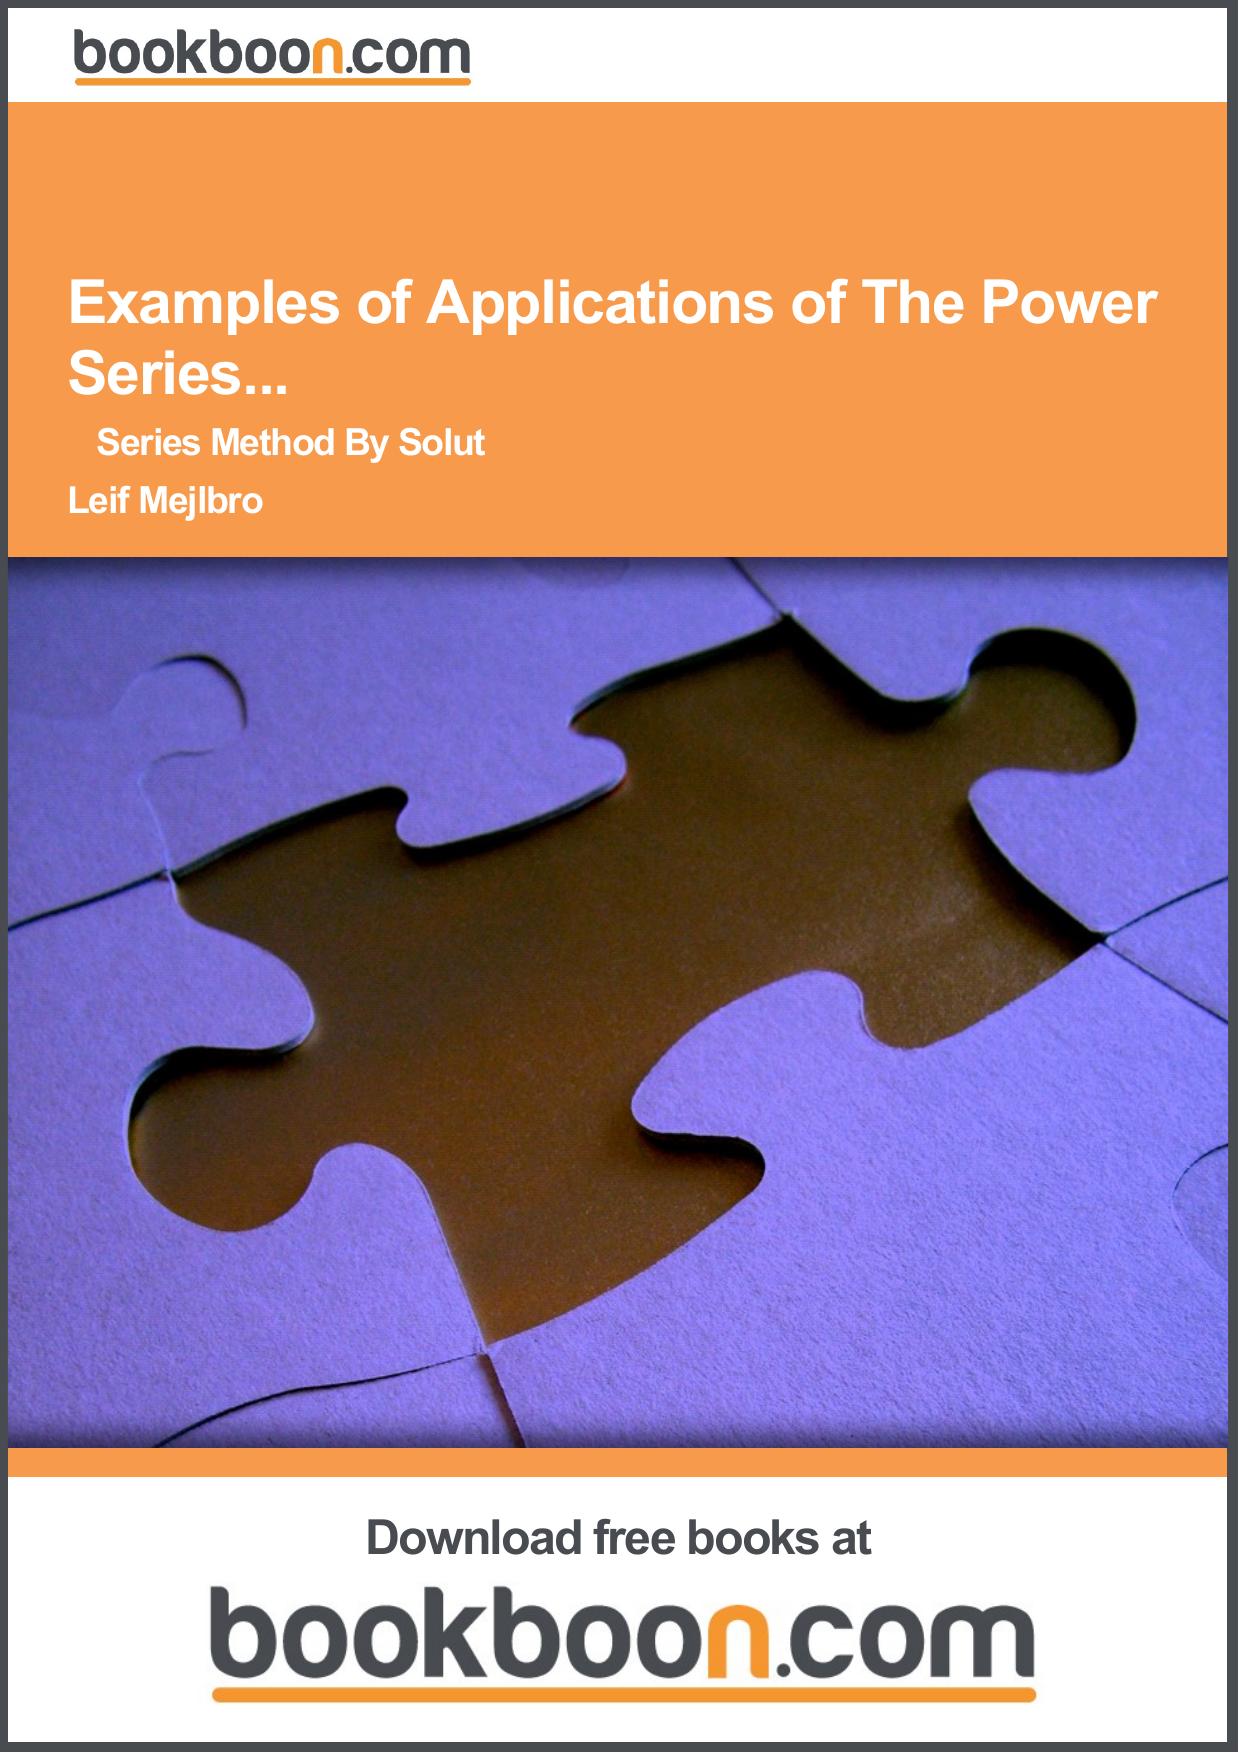 Examples of Applications of The Power Series... - Series Method By Solut